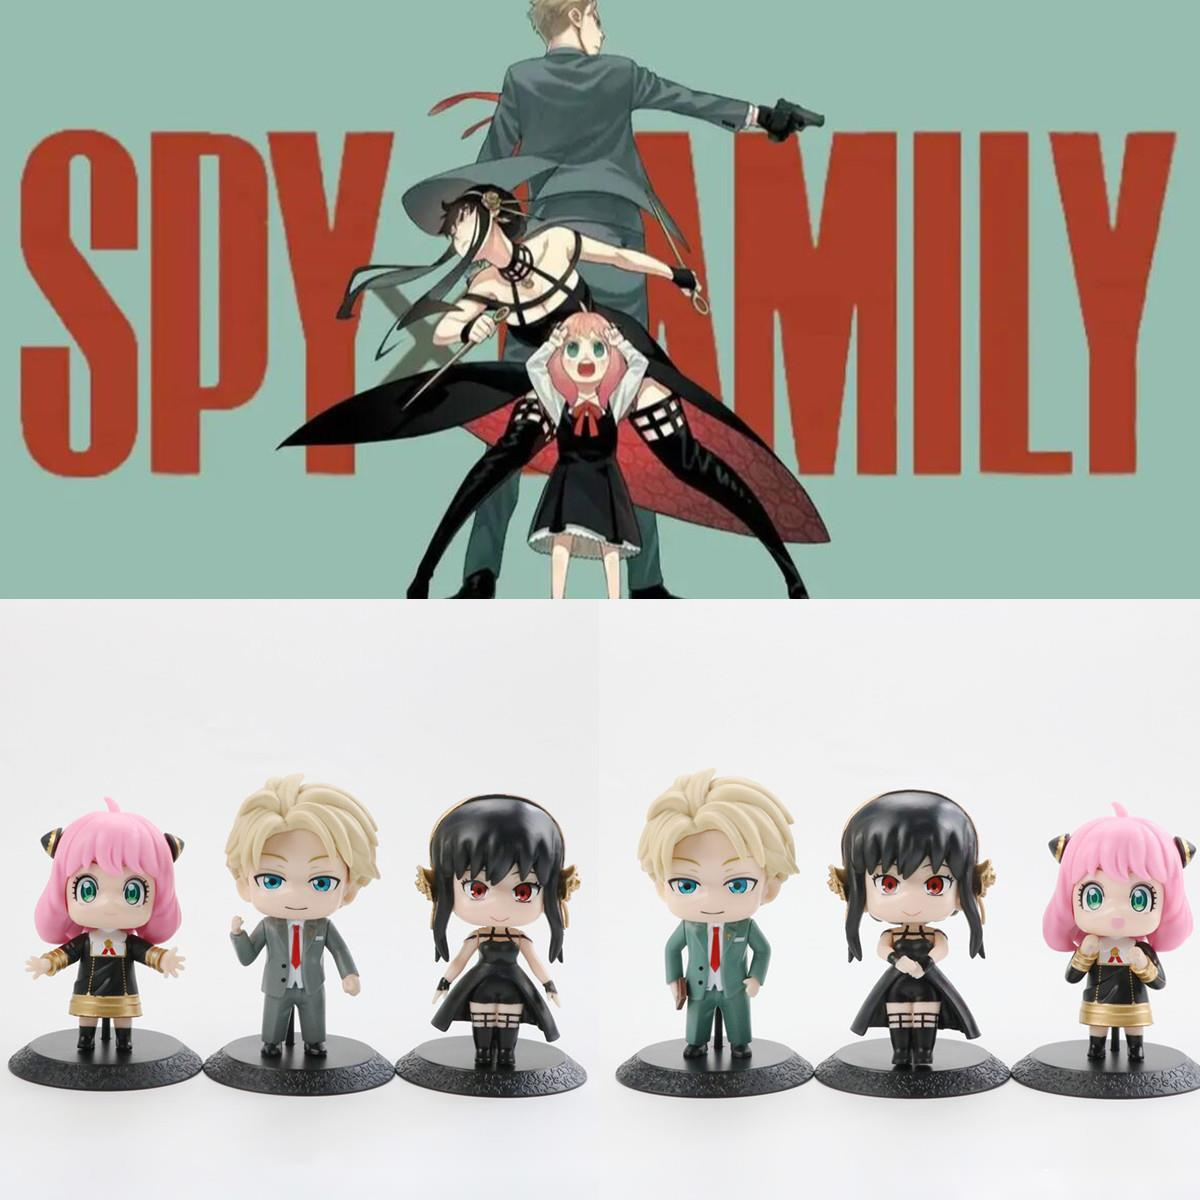 Spy x Family – All Cool Characters Themed Amazing PVC Action Figures (Set of 6) Action & Toy Figures